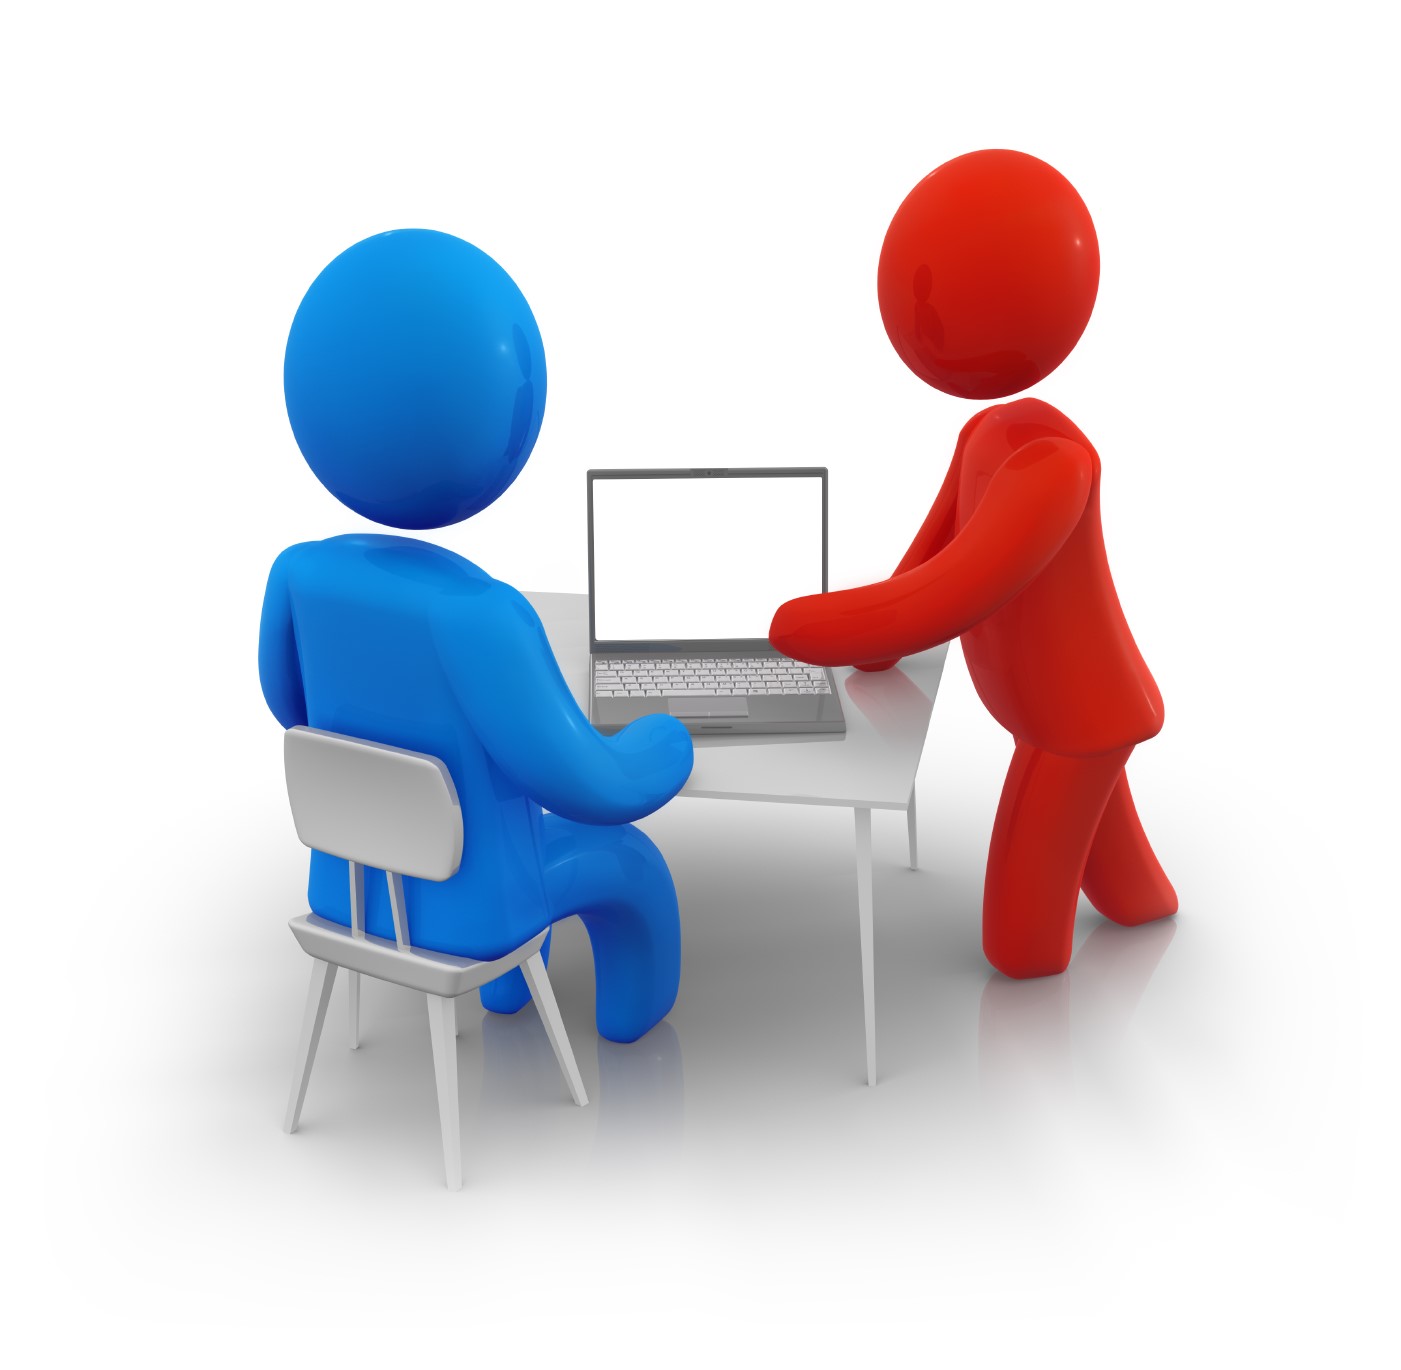 Graphic of a person training another person at a computer